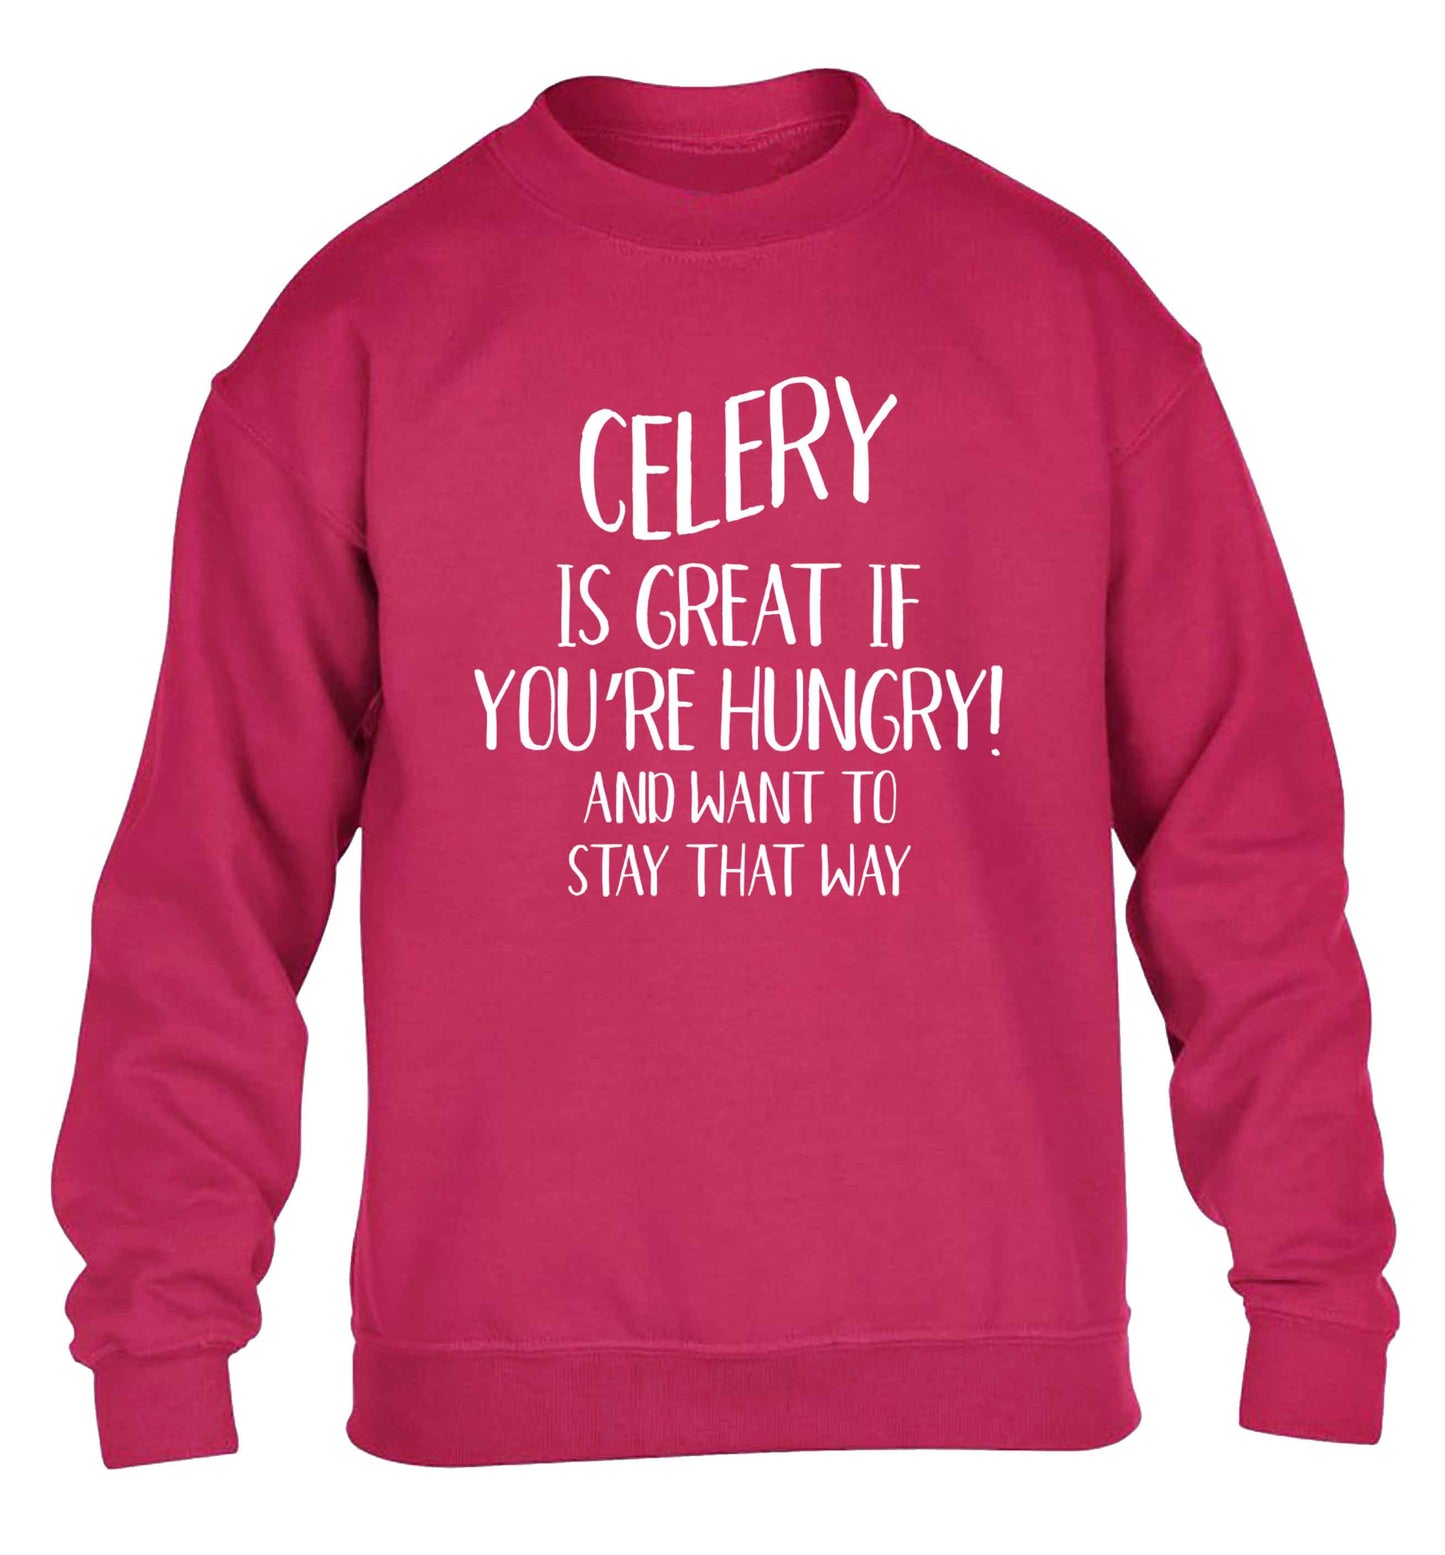 Cellery is great when you're hungry and want to stay that way children's pink sweater 12-13 Years